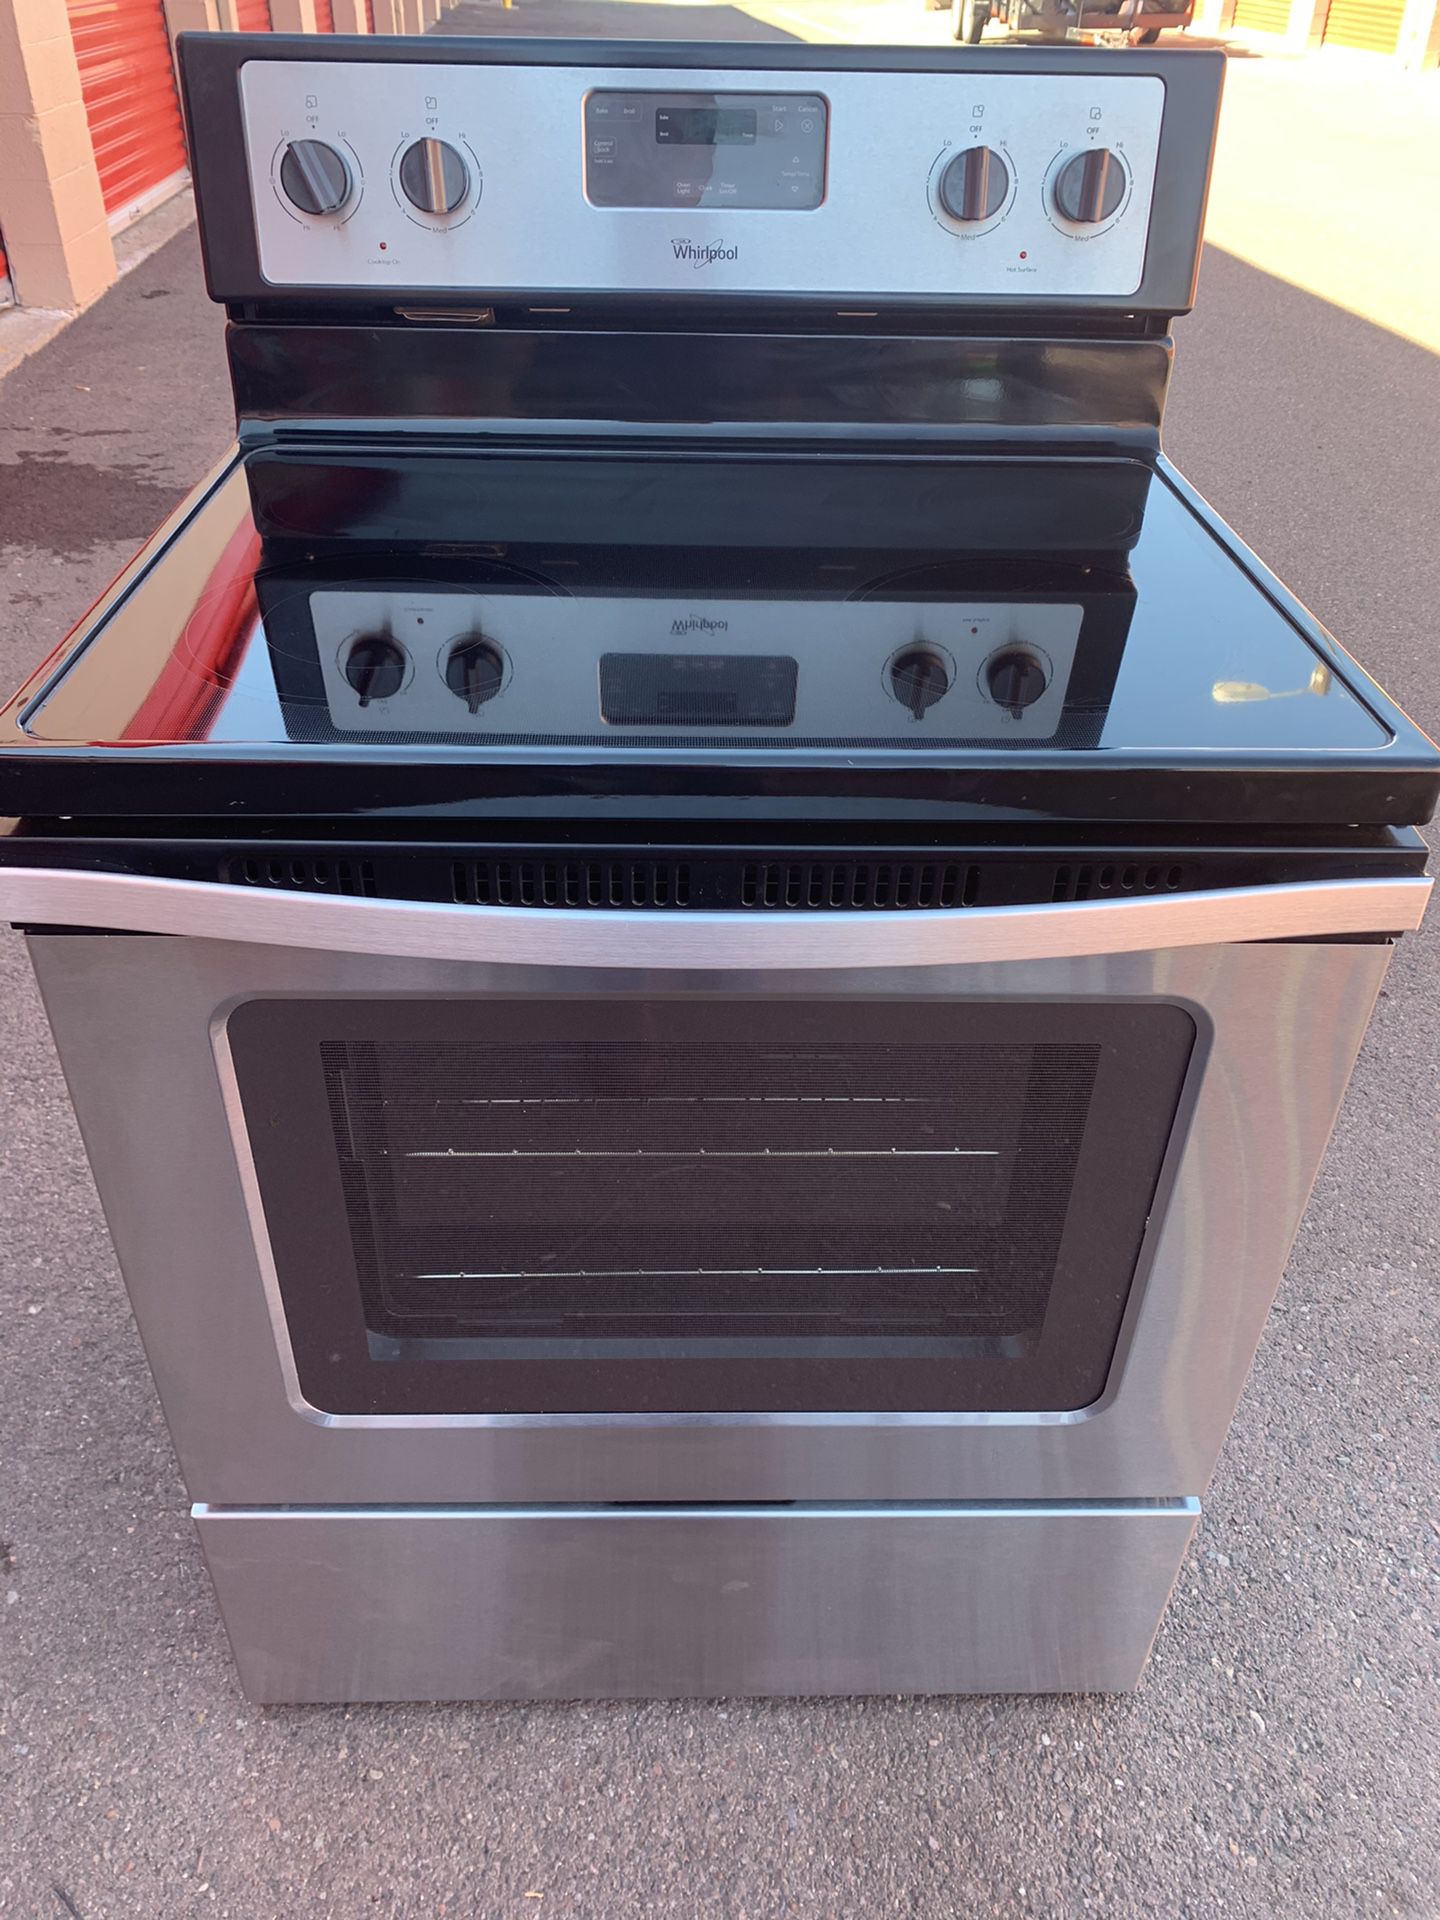 Whirlpool stove good condition